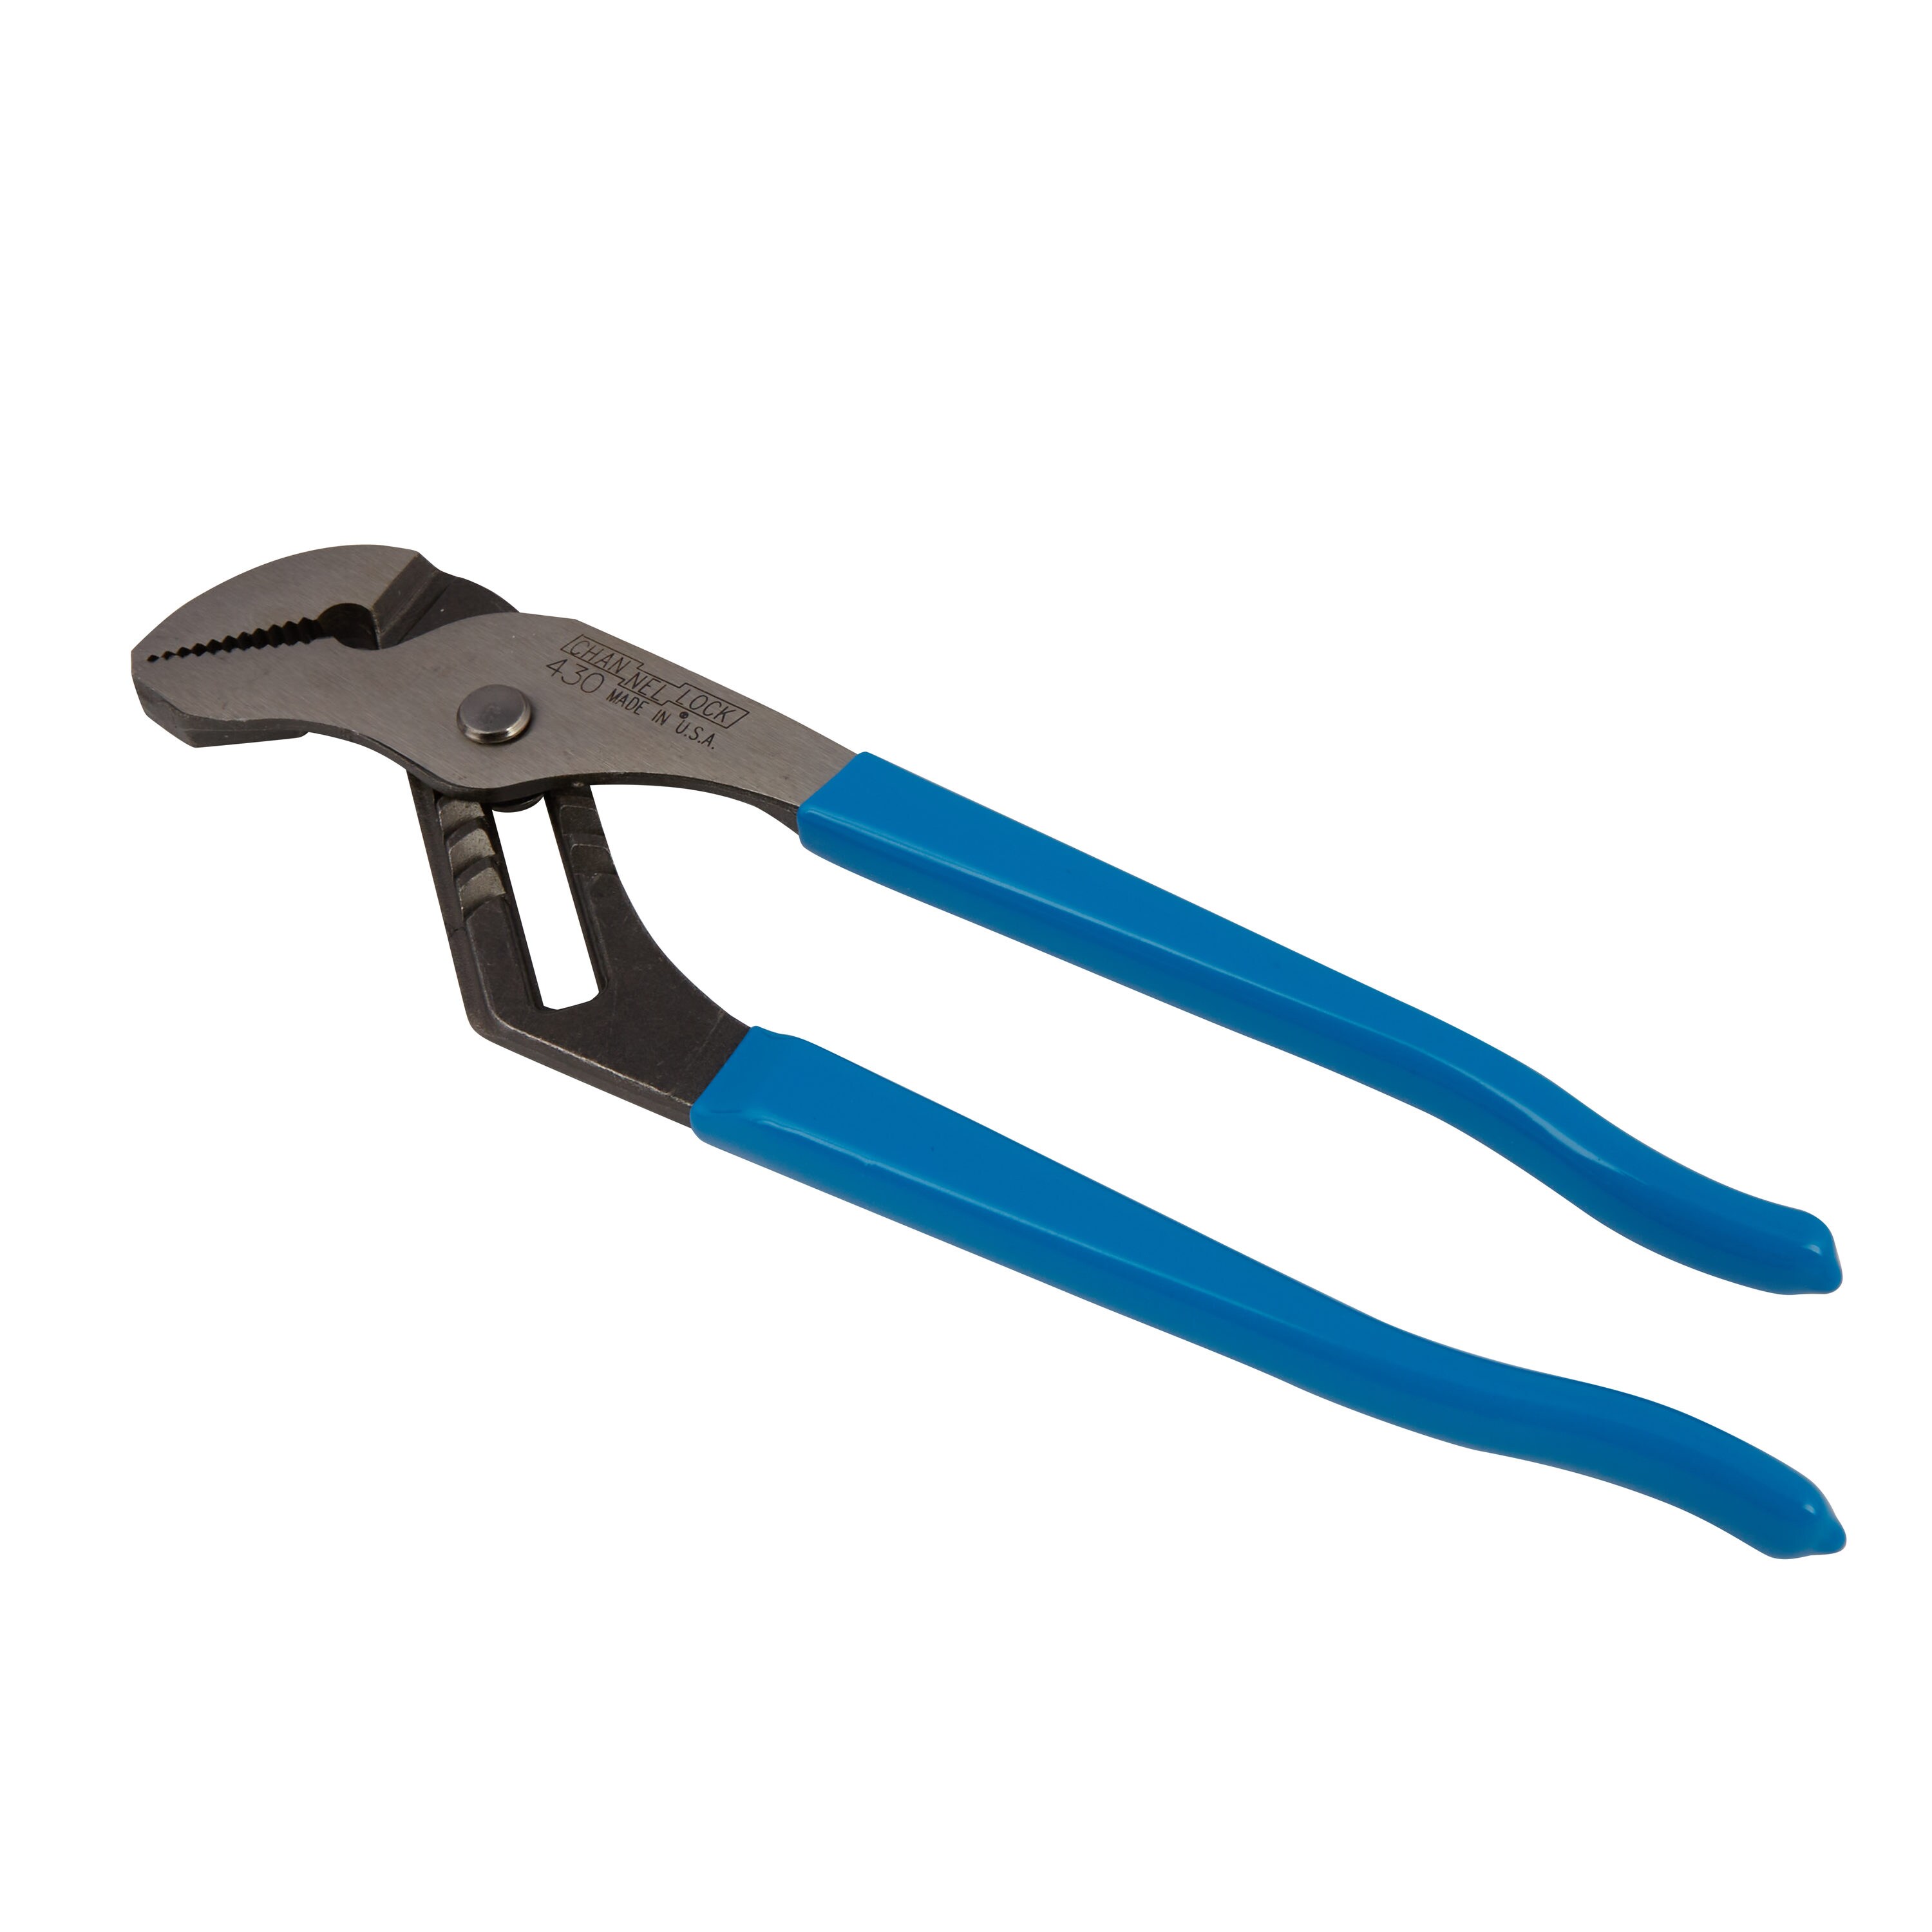 Channellock 432 2-Inch Jaw Capacity 10-Inch V-Jaw Tongue and Groove Plier 